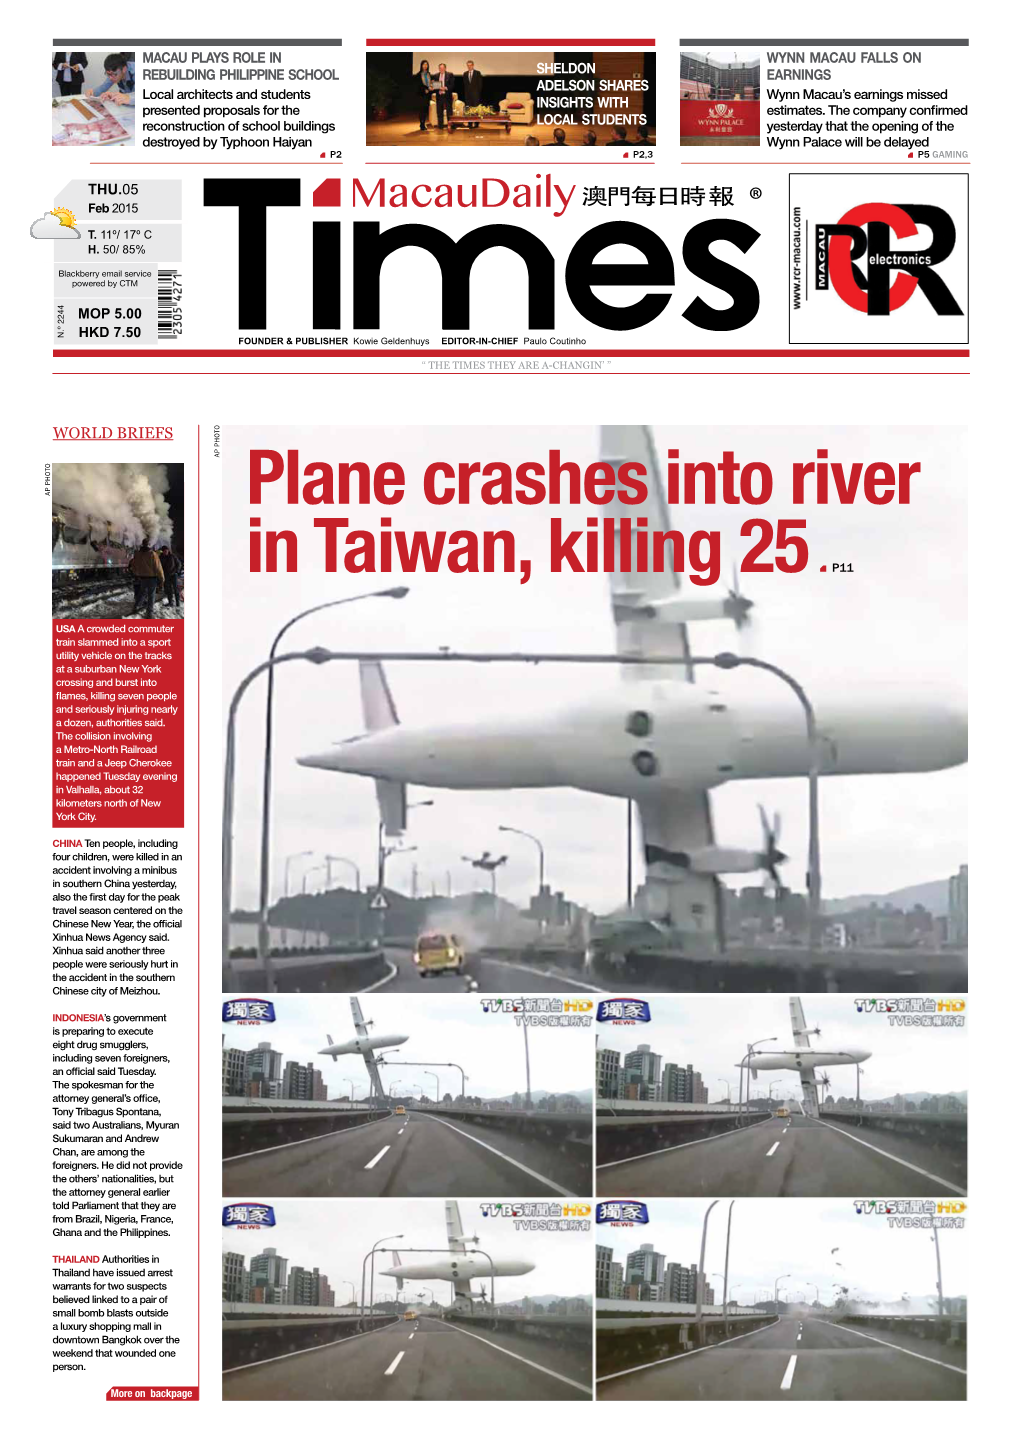 Plane Crashes Into River in Taiwan, Killing 25